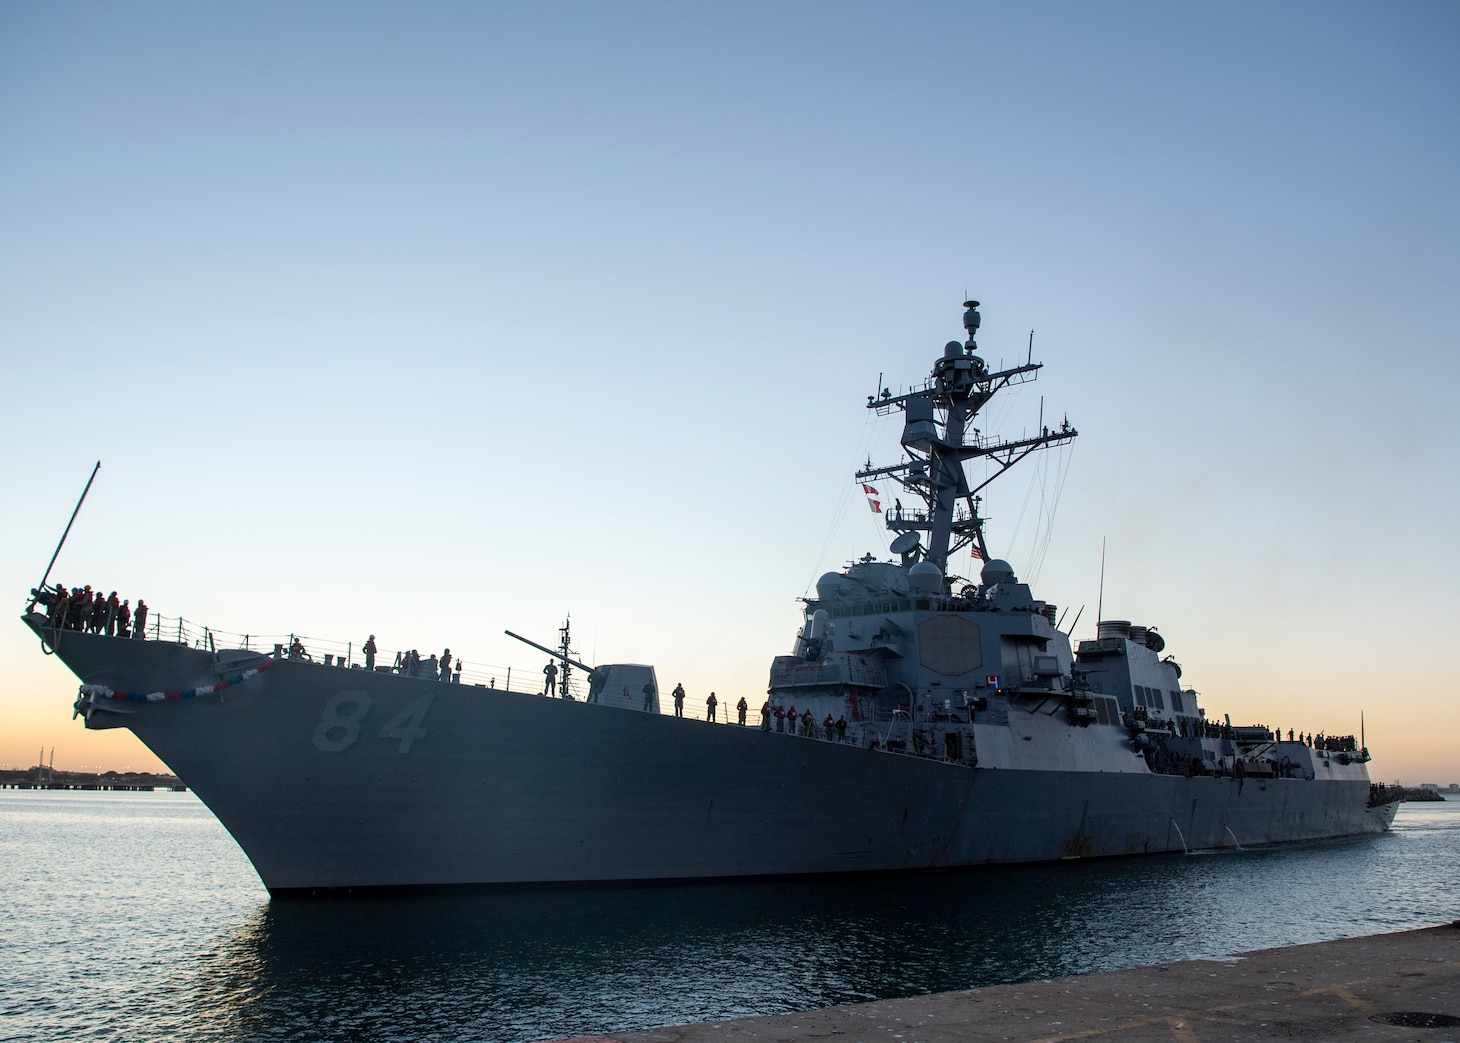 The Arleigh Burke-class guided-missile destroyer USS Bulkeley (DDG 84) pulls into port at Naval Station (NAVSTA) Rota, Spain after completing a homeport shift, Aug. 17, 2022.